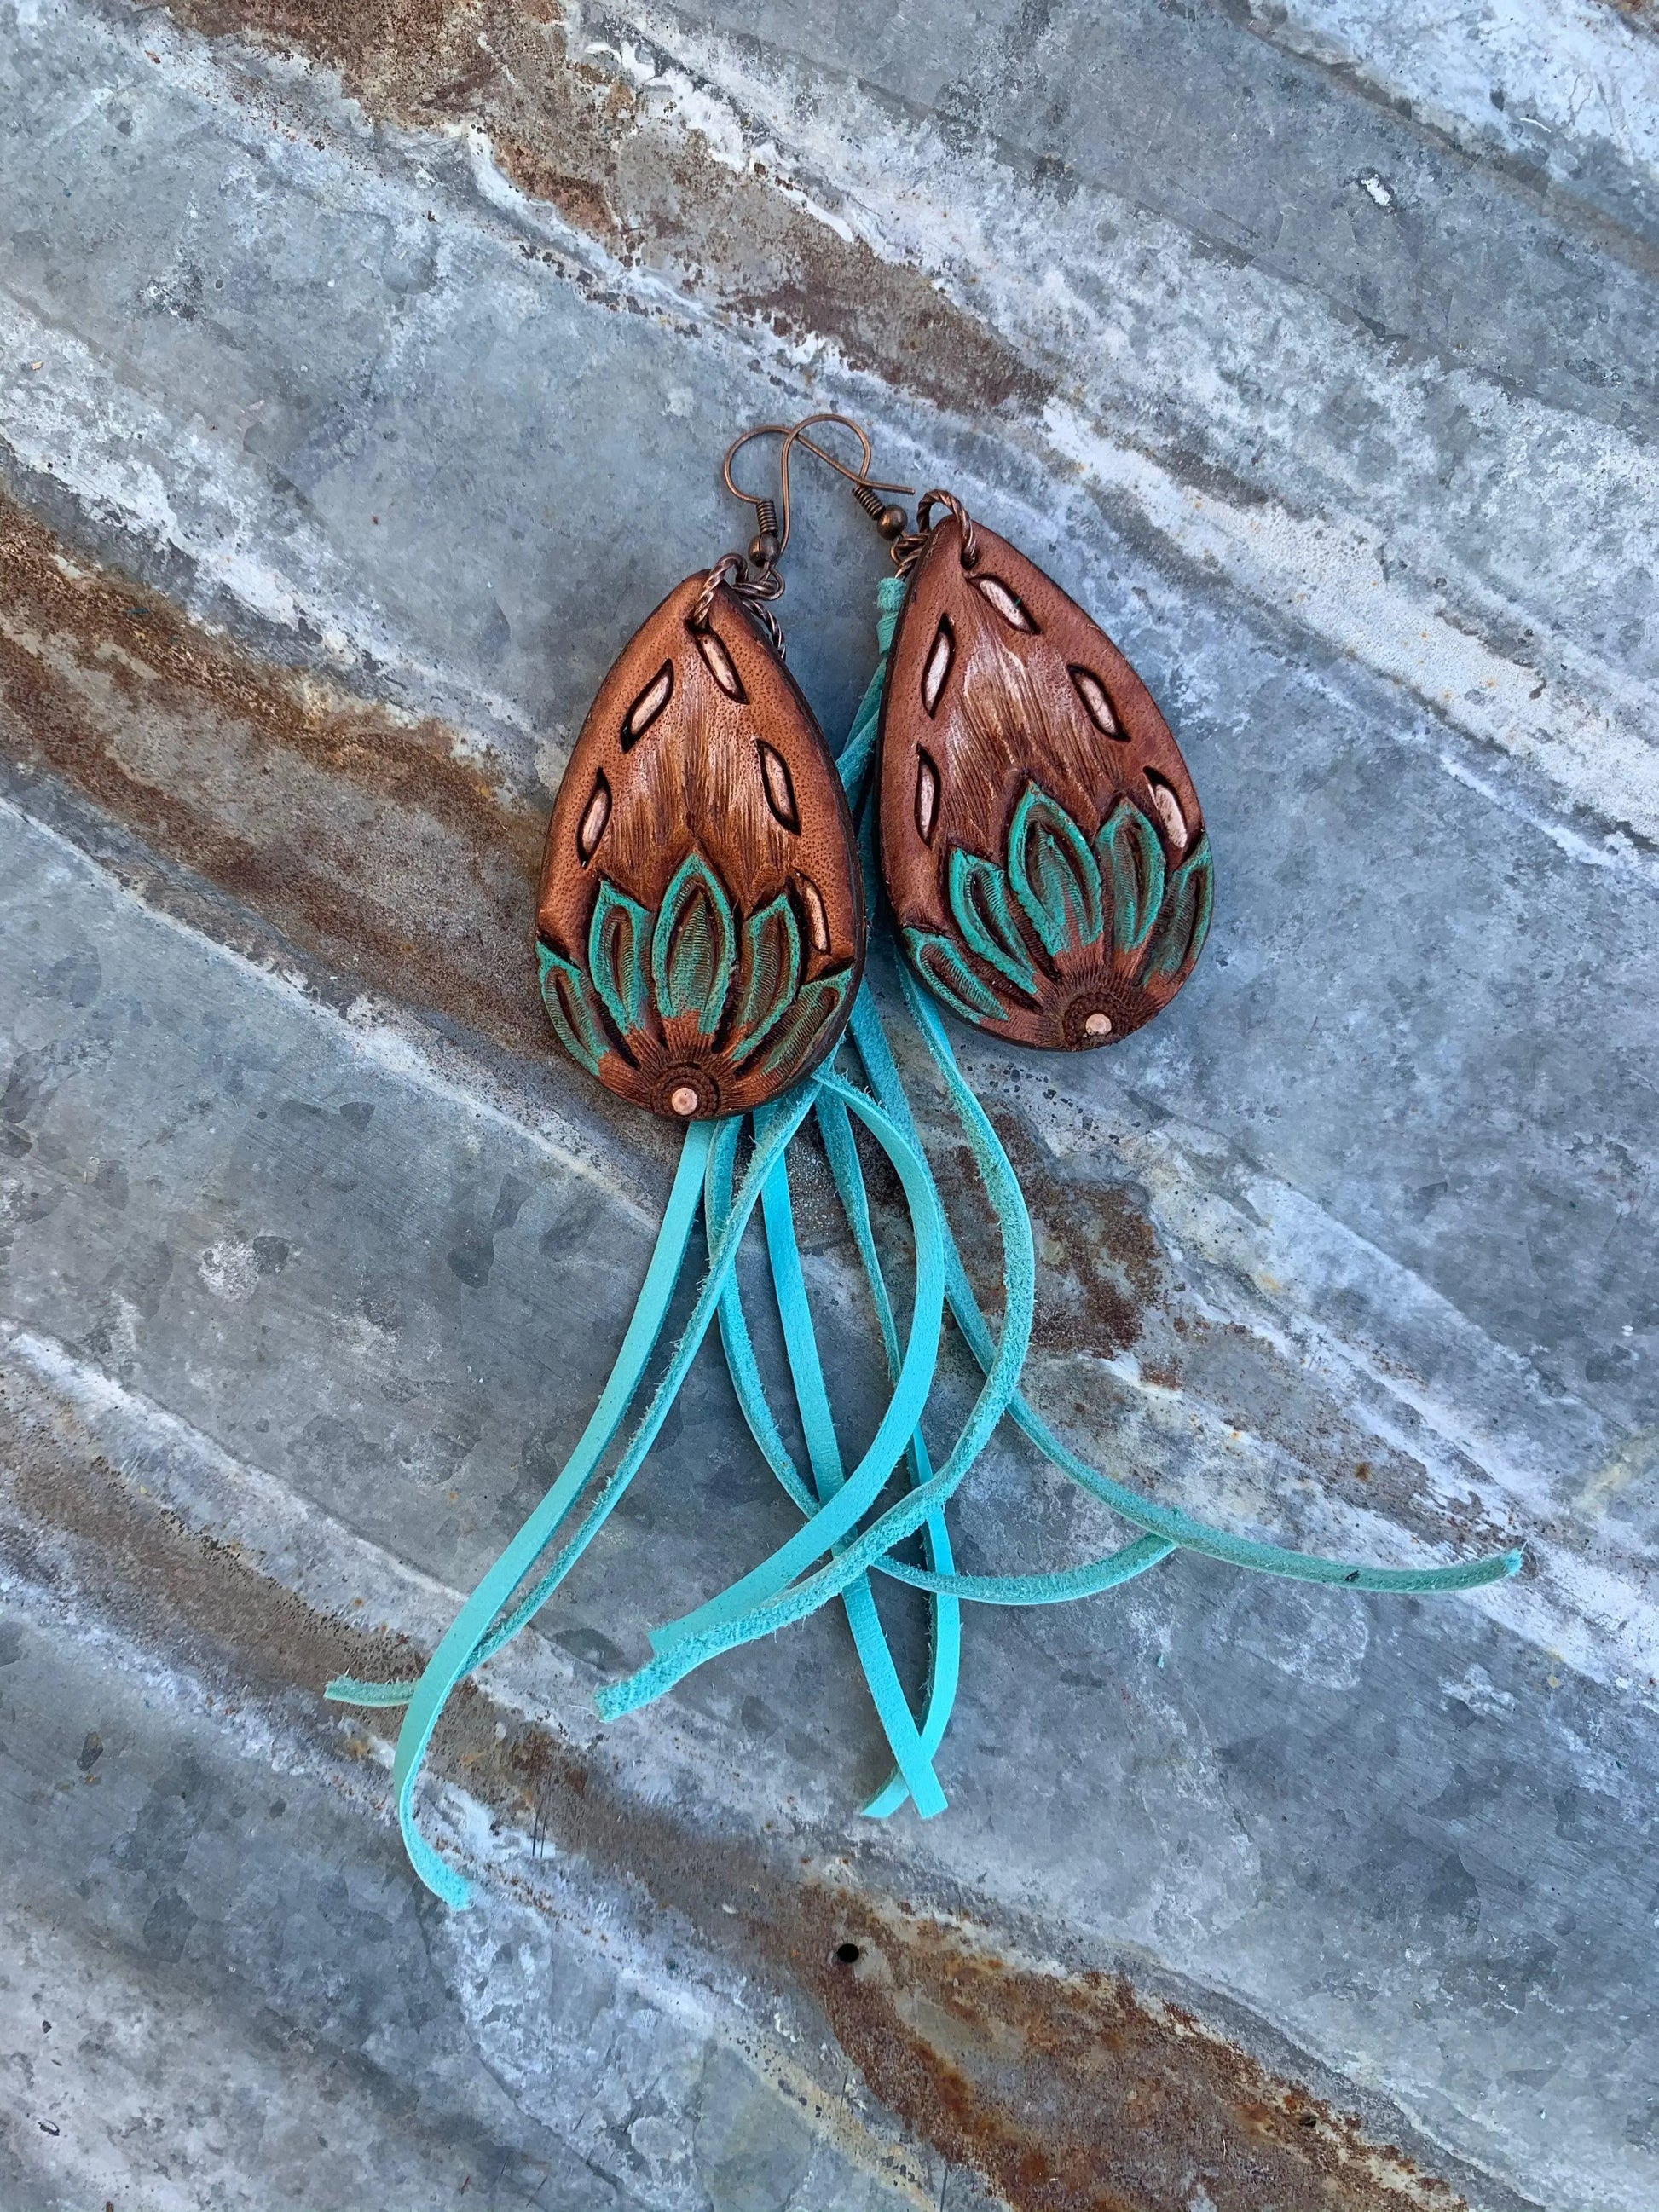 The Tad Hand tooled Leather Earring with Buckstitch Border and Fringe The Rodeo Rose